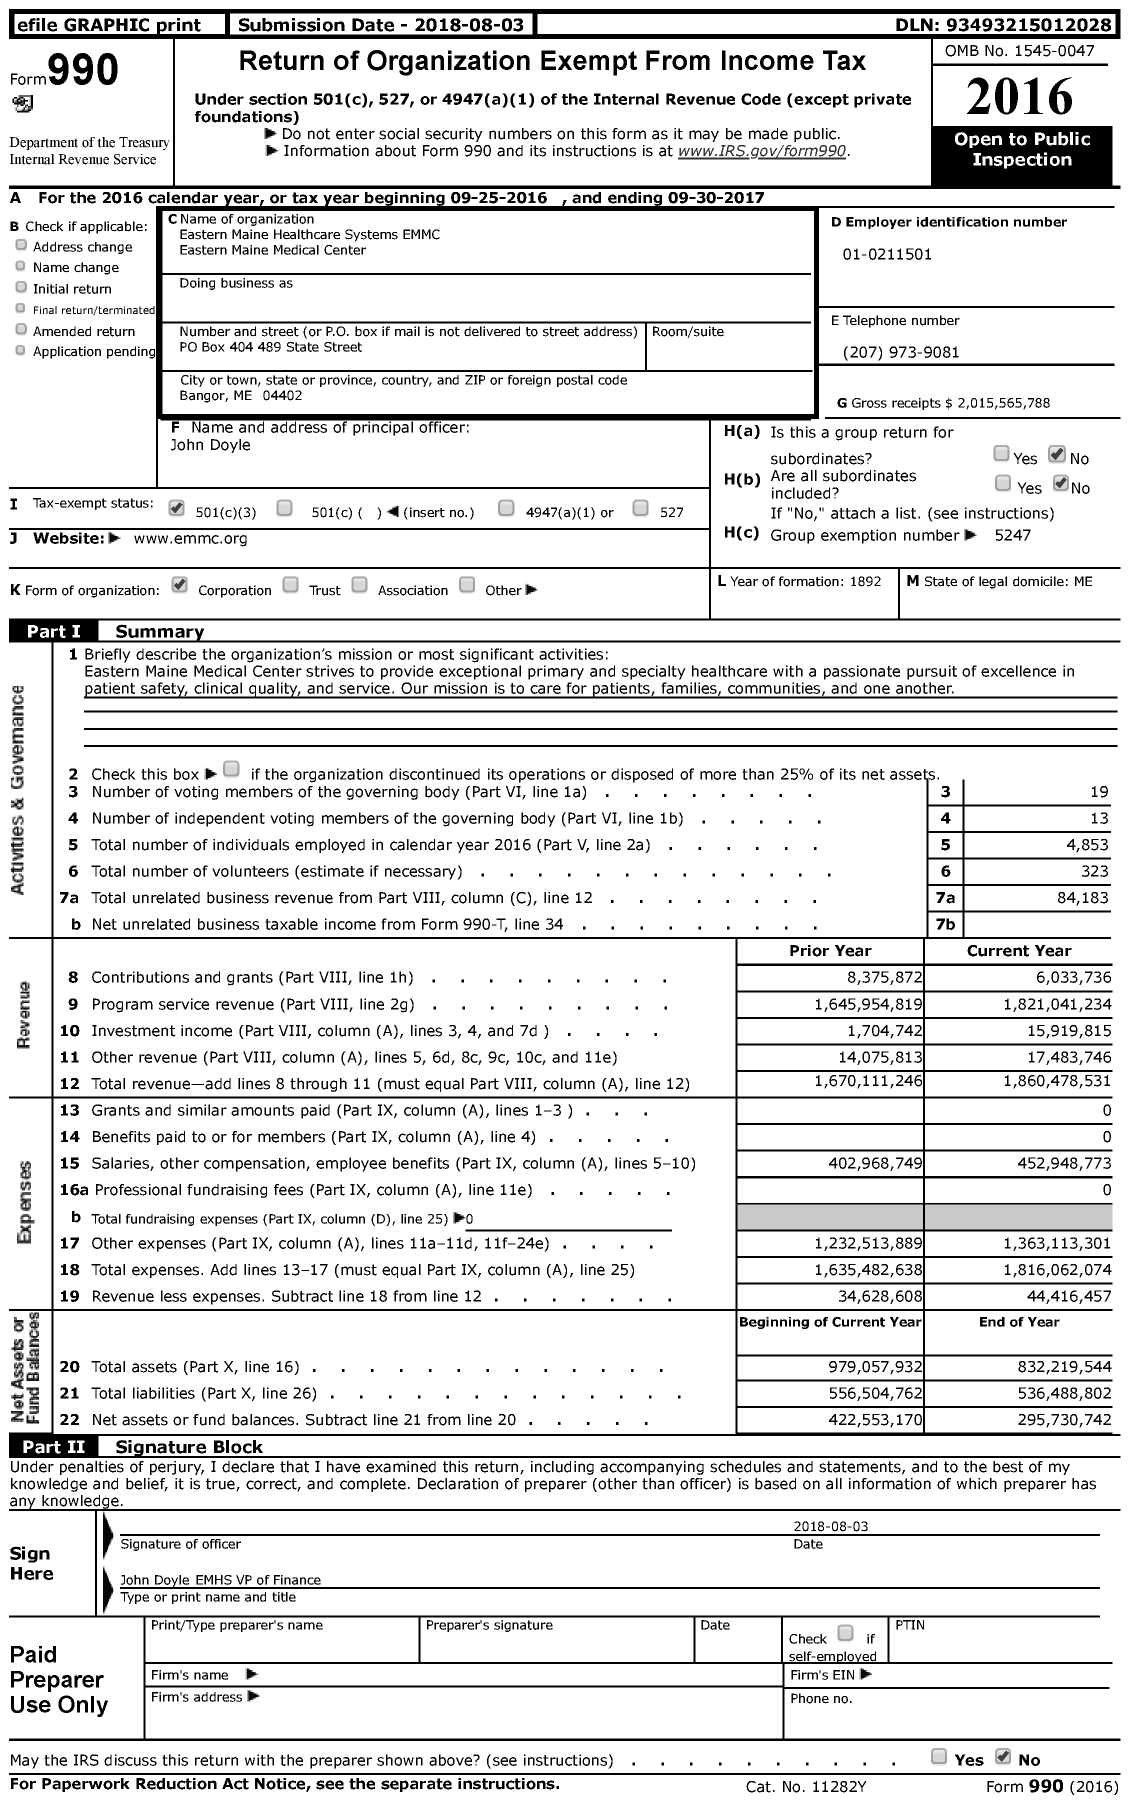 Image of first page of 2016 Form 990 for Eastern Maine Healthcare Systems EMMC Eastern Maine Medical Center (EMHS)